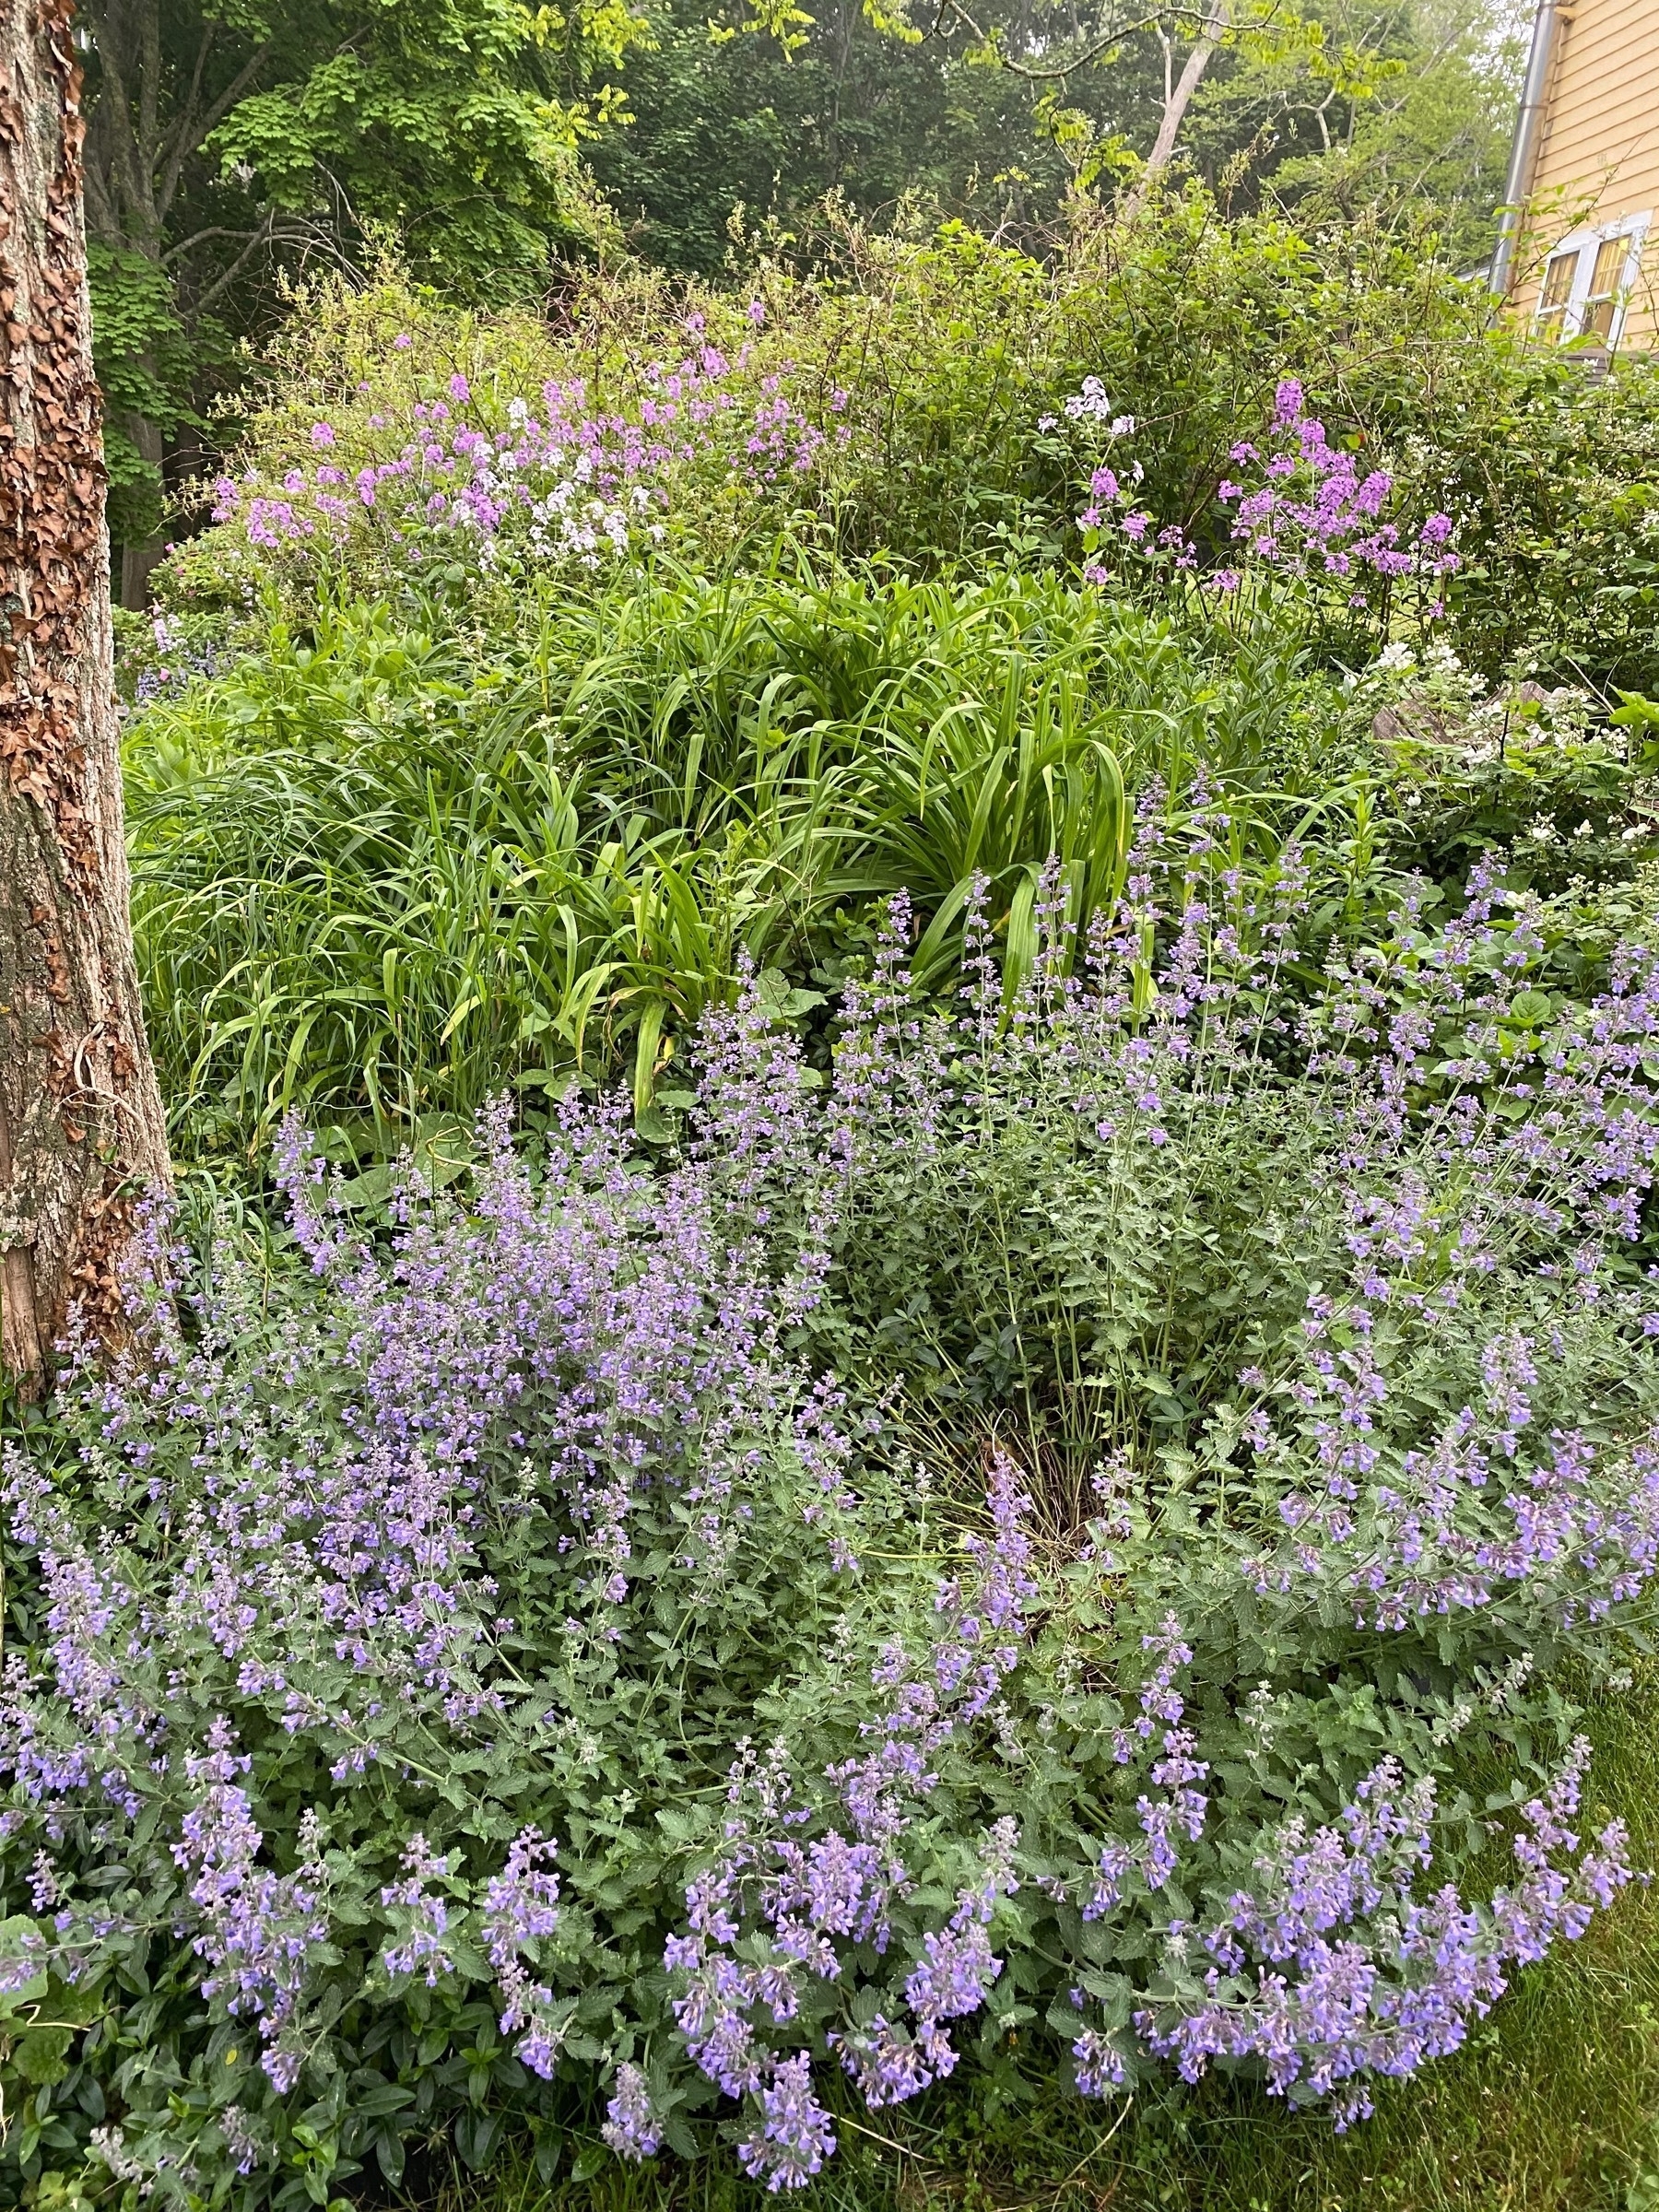 Garden with small purple flowers and greenery.